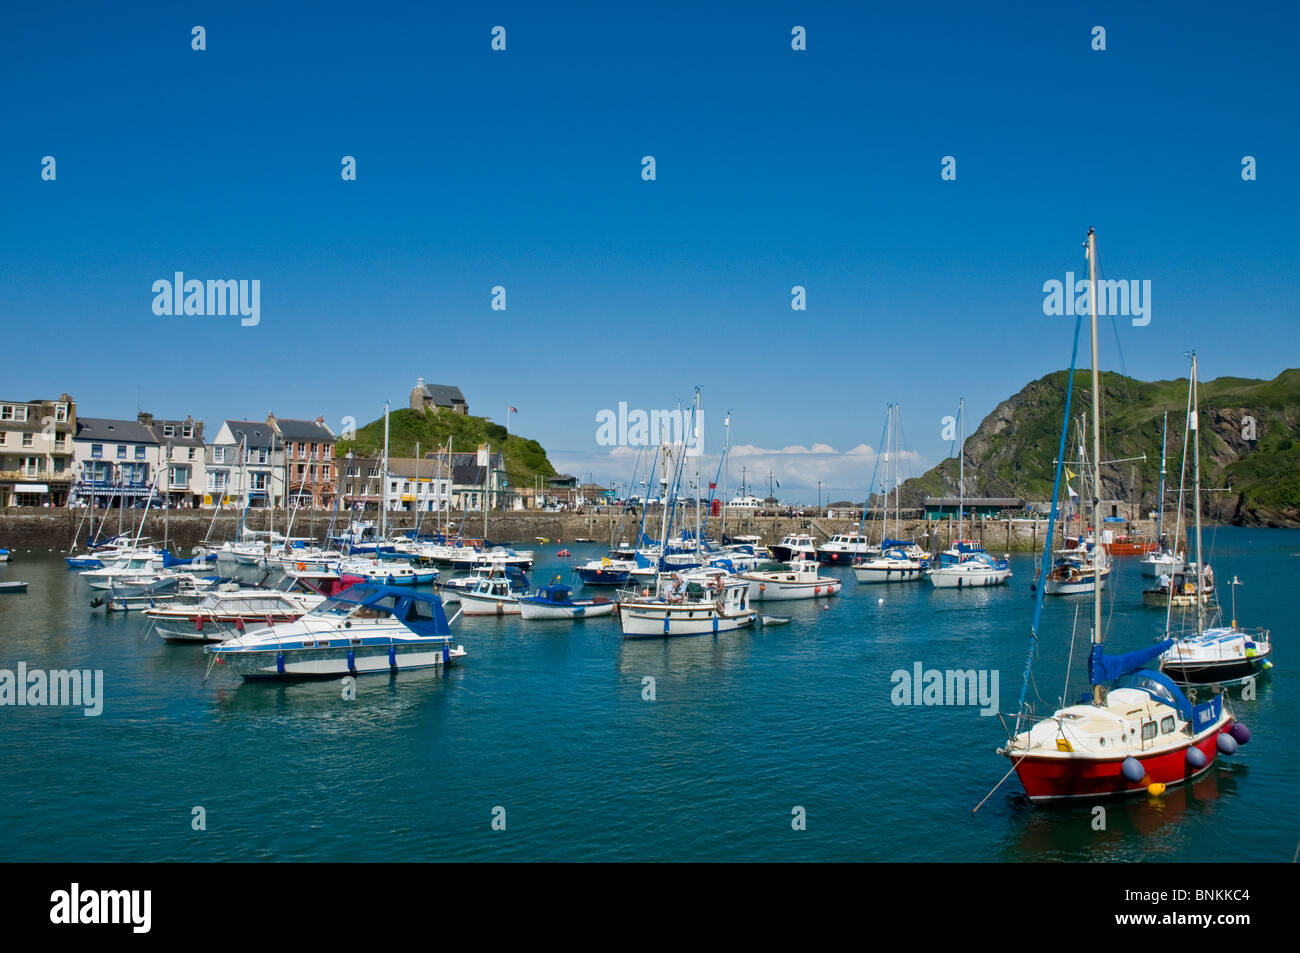 Boats & yachts iin th harbour at Ilfracombe  Devon England Stock Photo